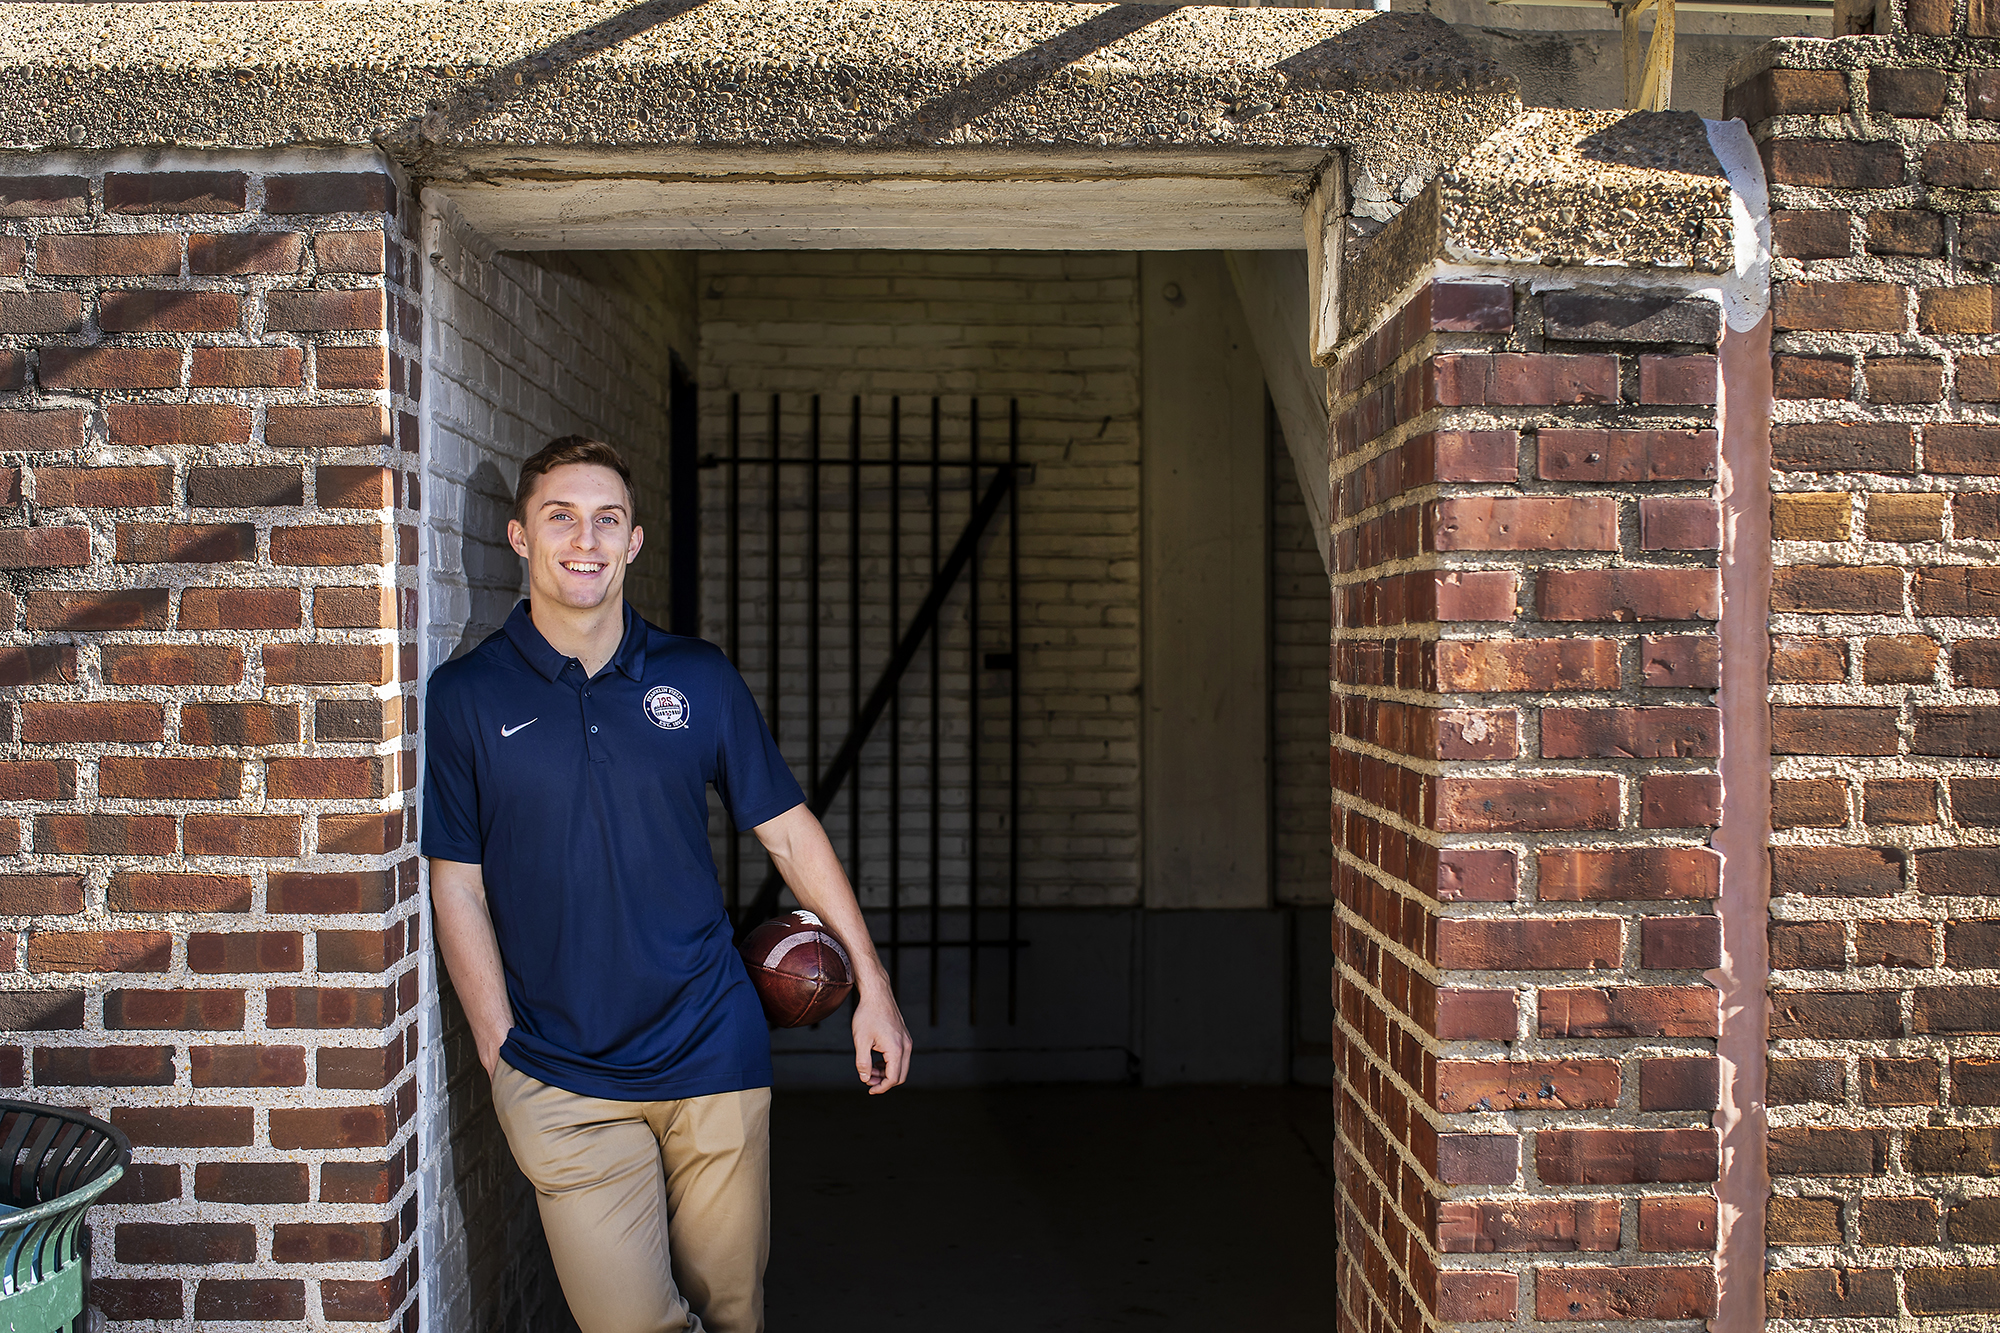 Eddie Jenkins holds a football under his arm while posing in a tunnel at Franklin Field.